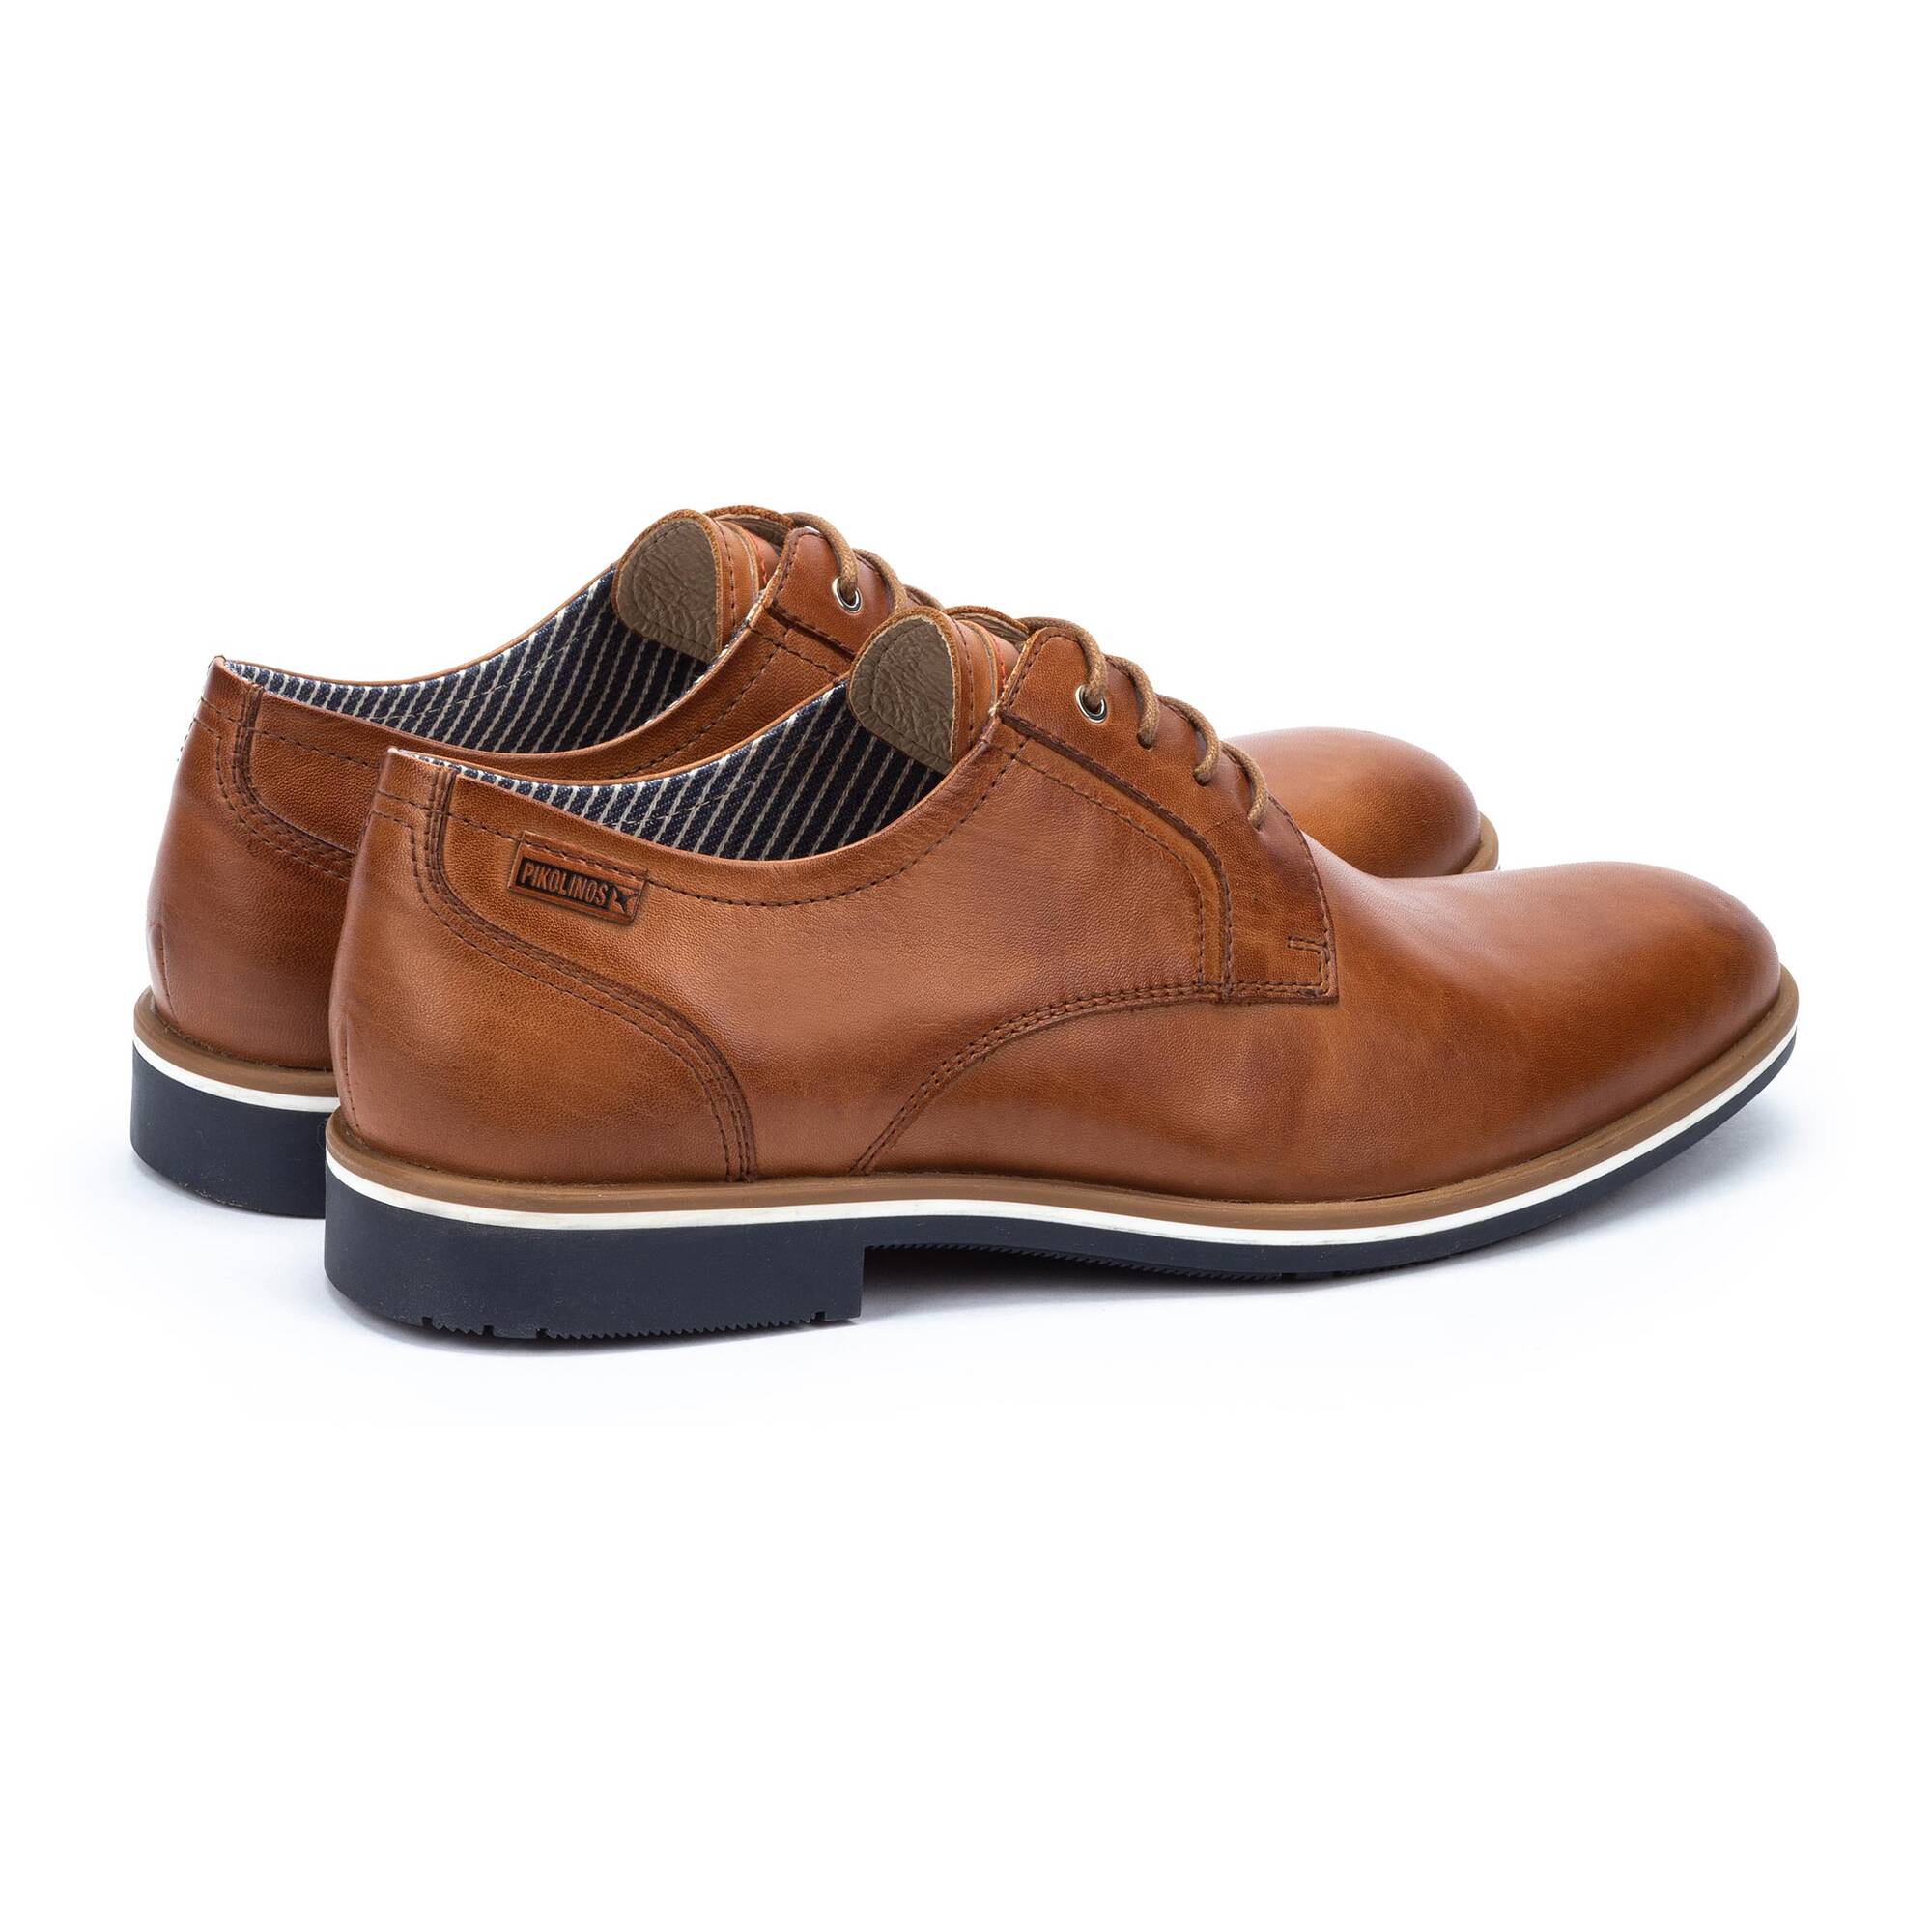 Casual shoes | LEON M4V-4130, BRANDY, large image number 30 | null